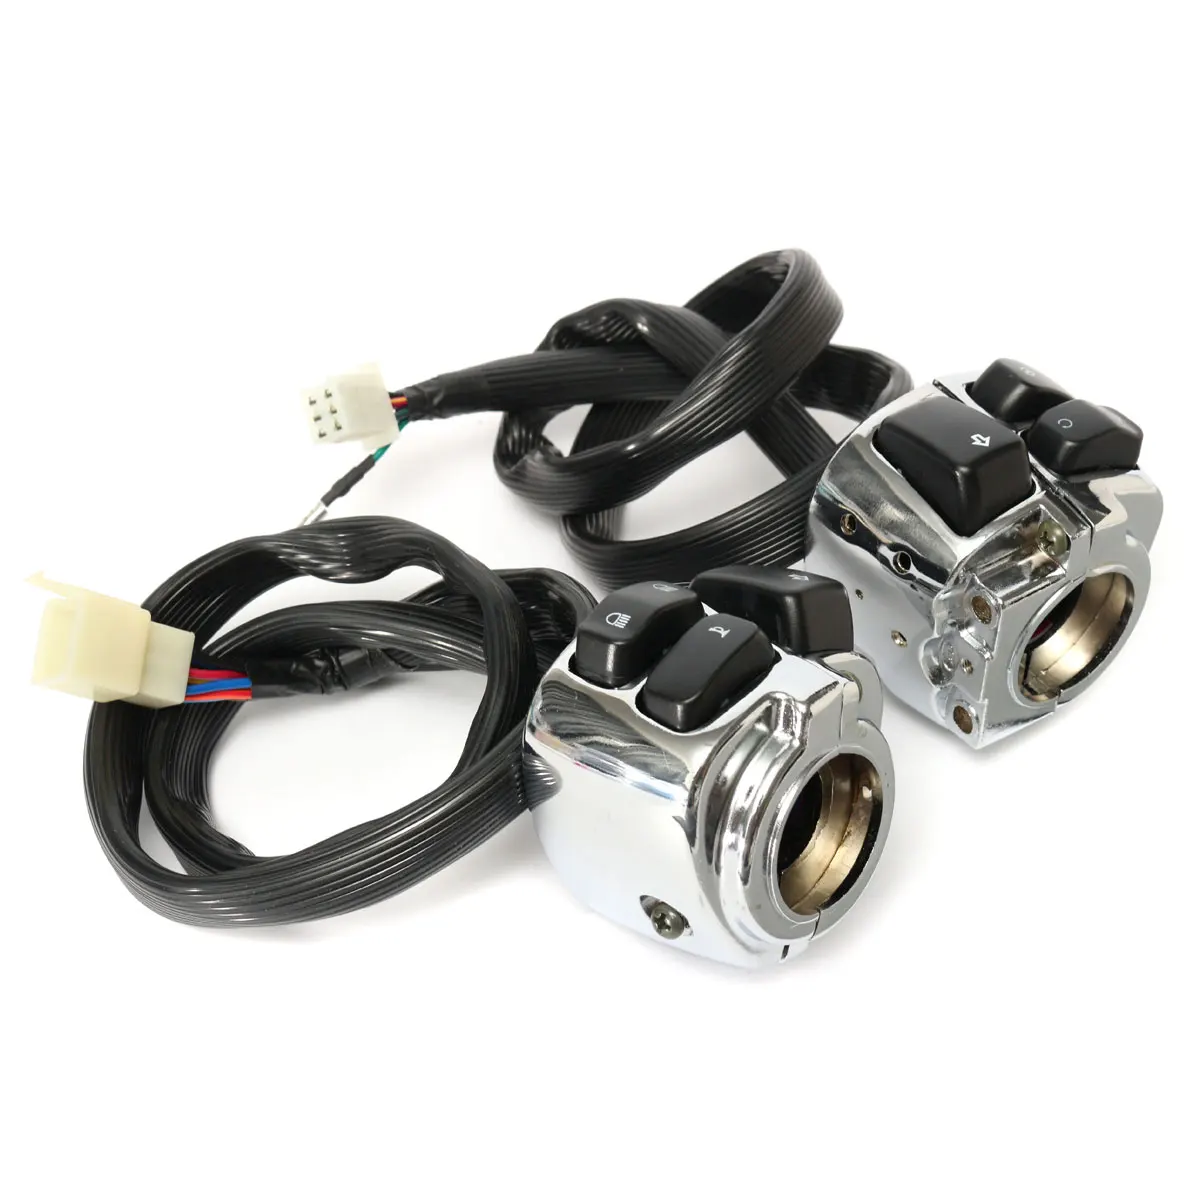 Motorcycle 1" 25mm Handlebar Control Switch + Wiring Harness Black/Chrome For XL883/Sportster/Dyna/V-ROD/Softail